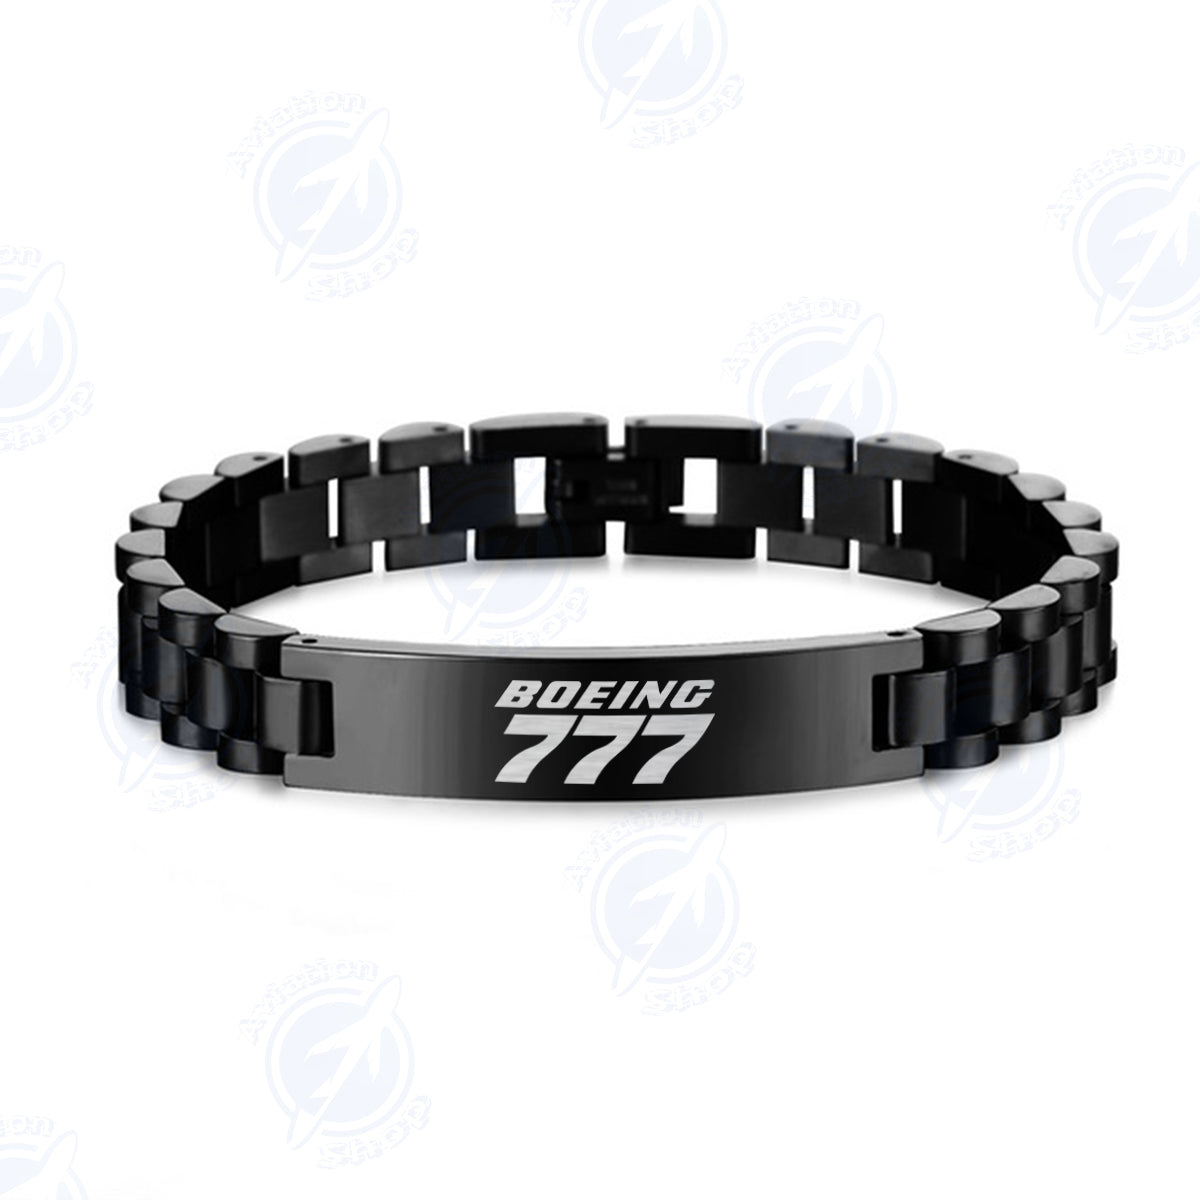 Boeing 777 & Text Designed Stainless Steel Chain Bracelets